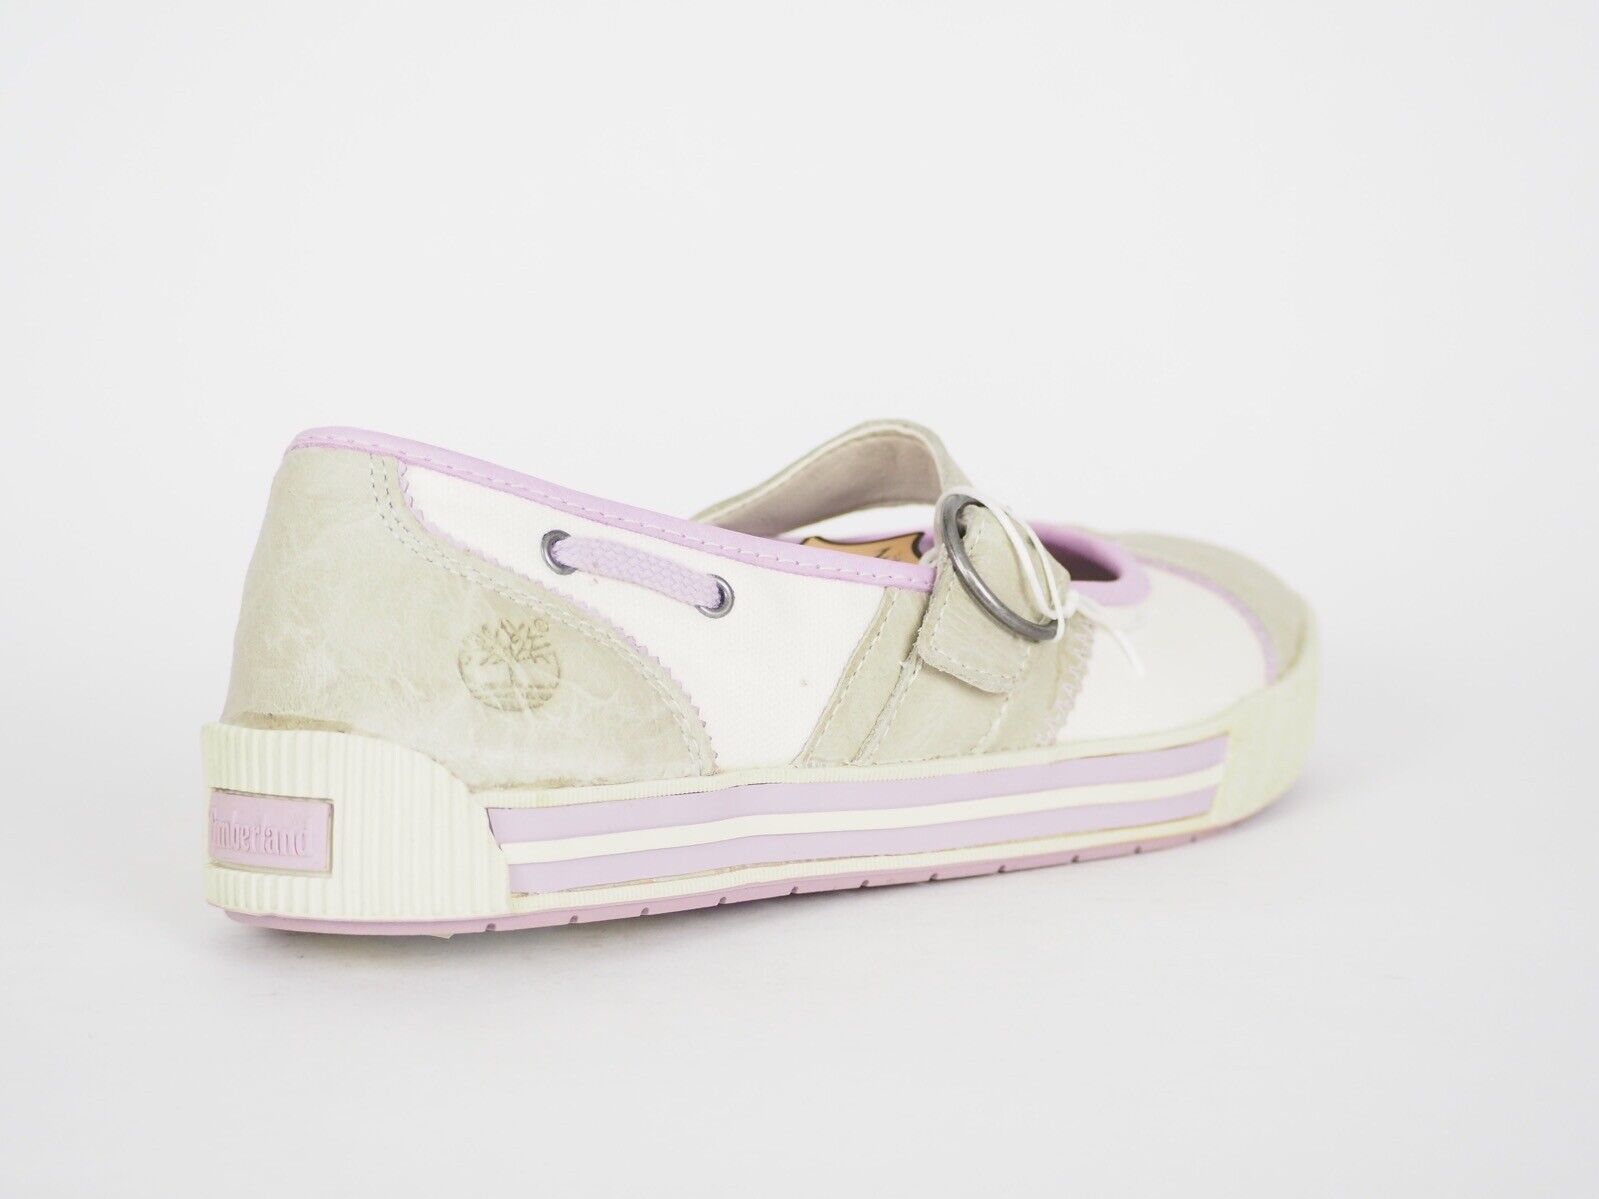 Junior Girls Timberland Metro Network 52952 Grey Leather Mary Jane Shoes UK 5.5 - London Top Style